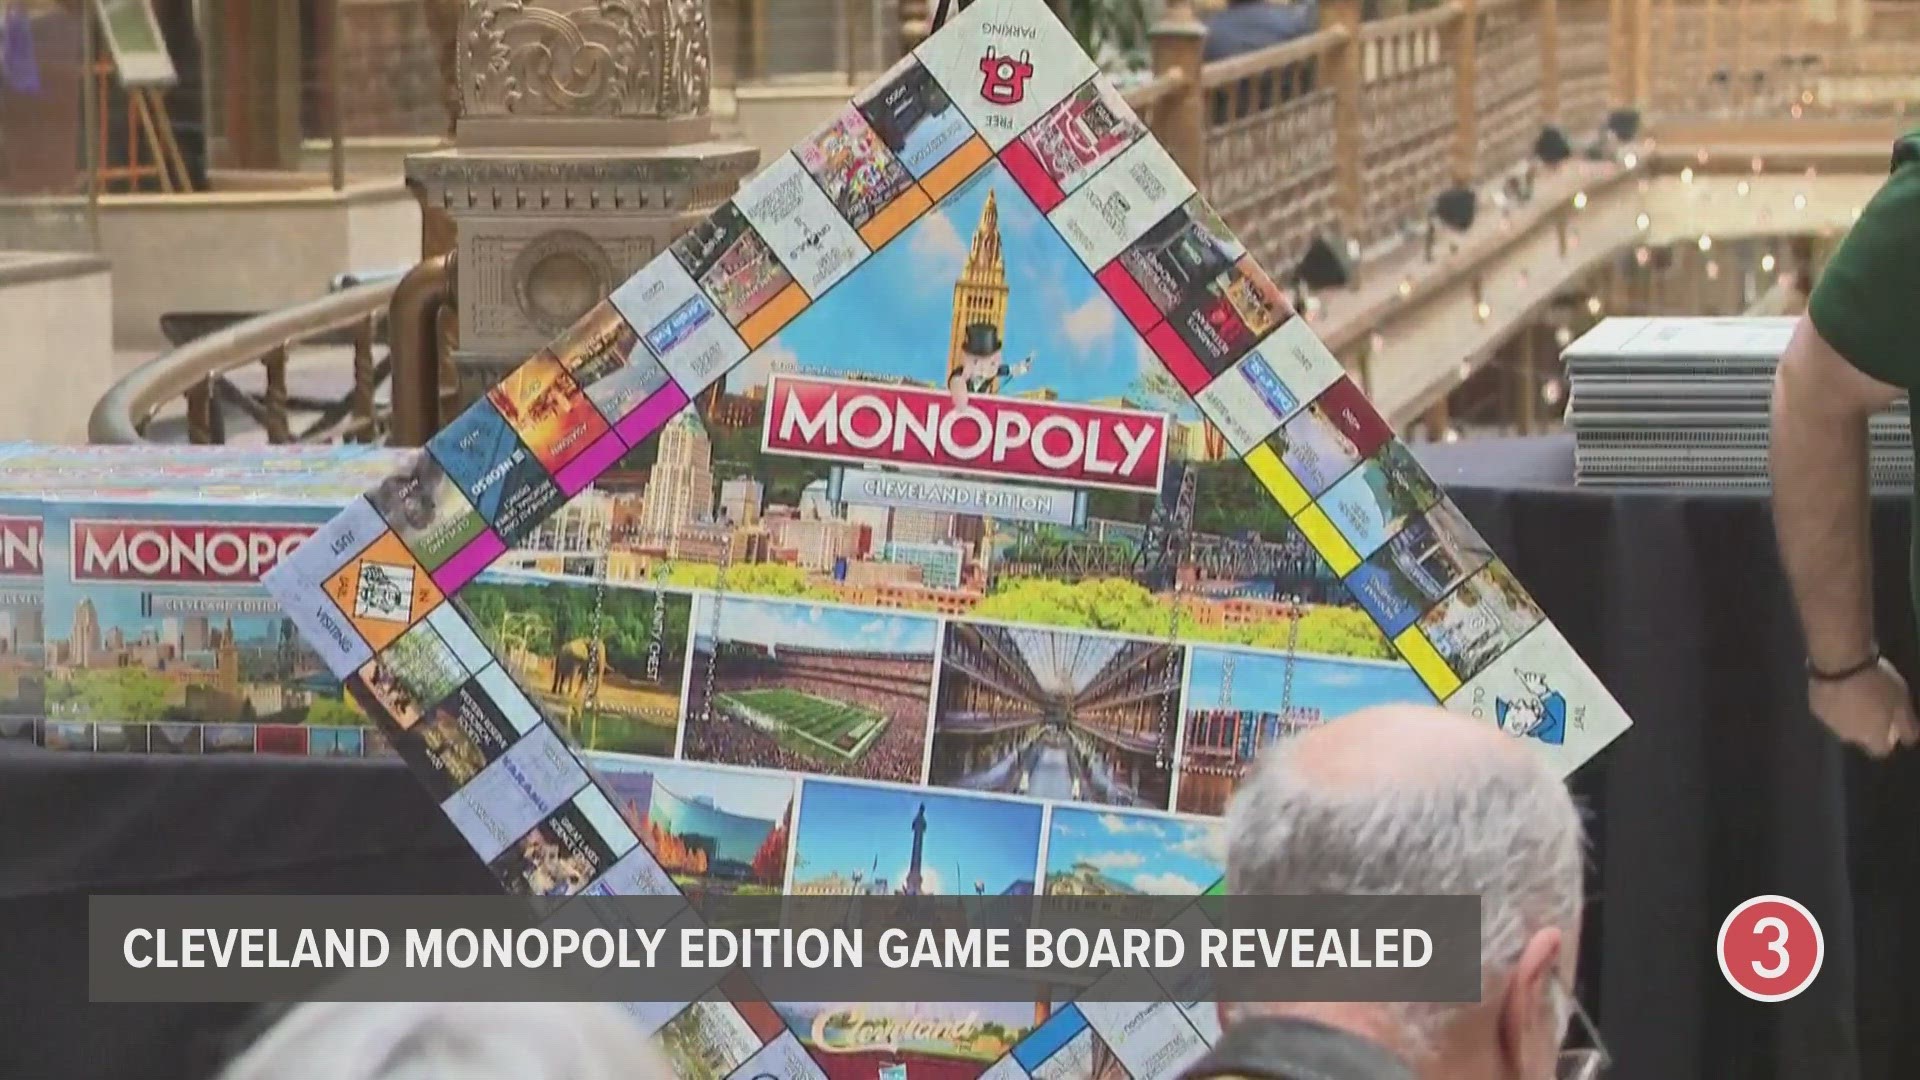 Cleveland Monopoly game board revealed